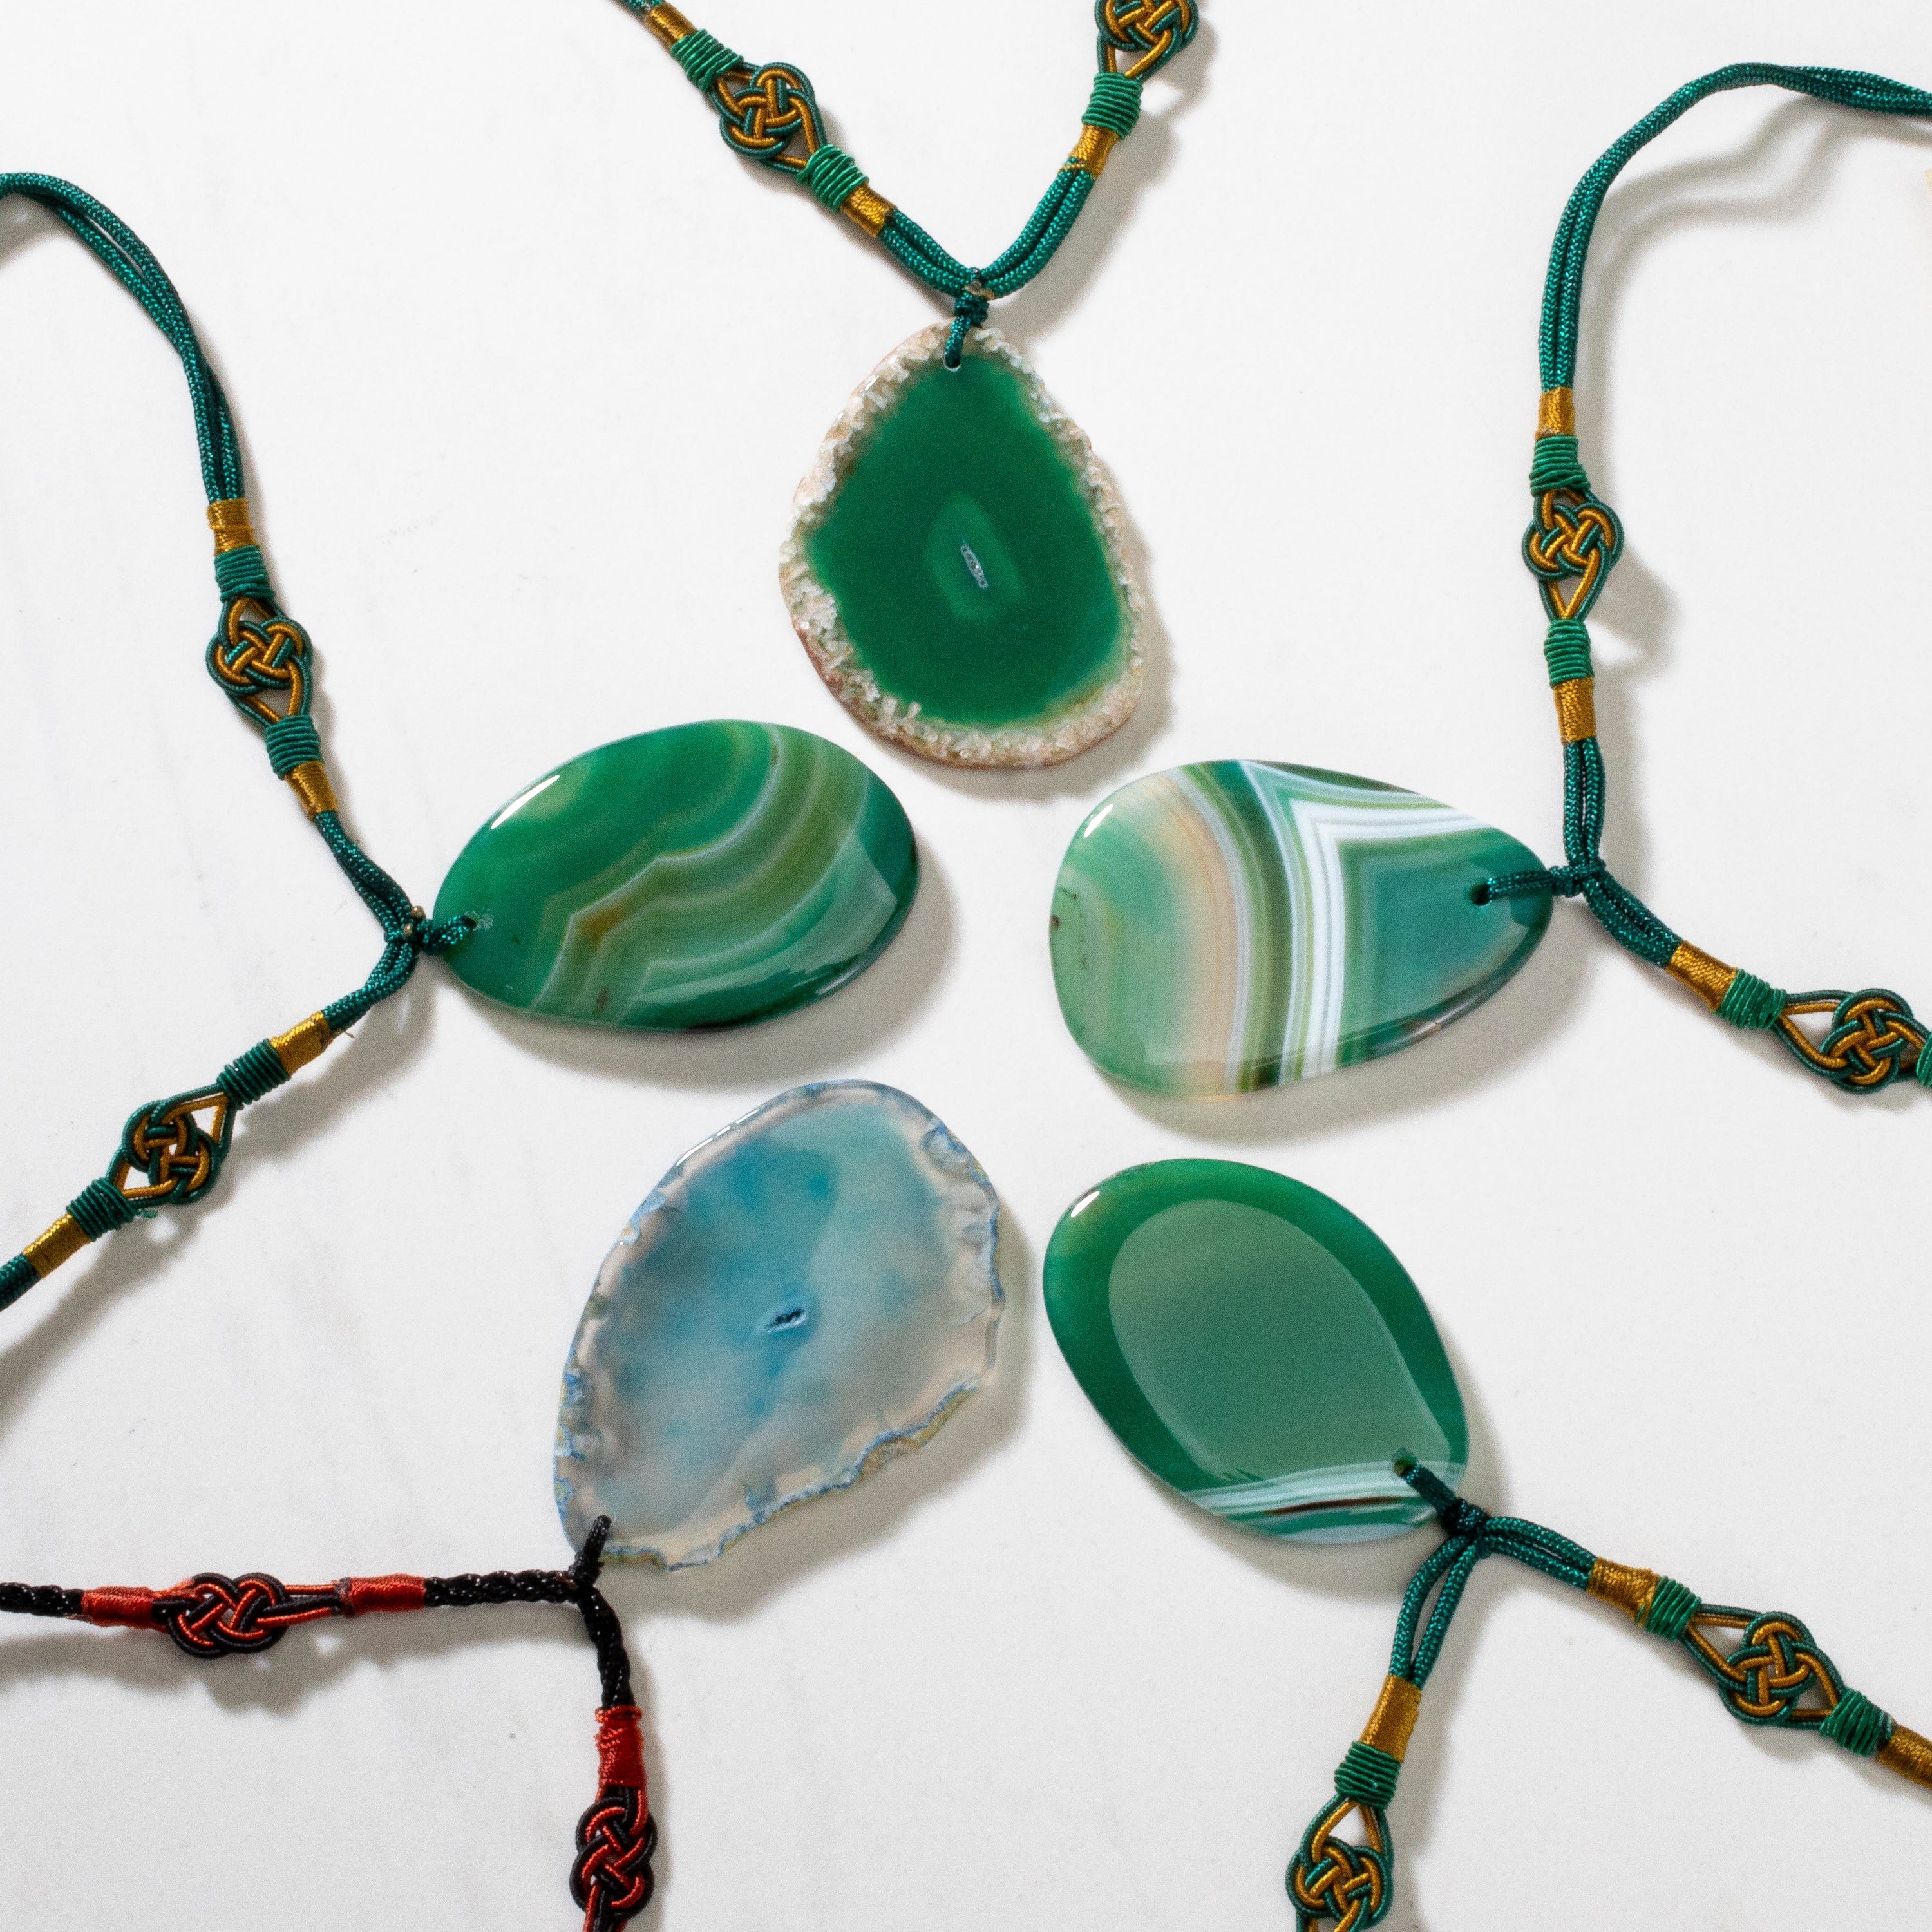 KALIFANO Gemstone Necklaces Green Agate Geode Slice Necklace BLUE-BAS-GN